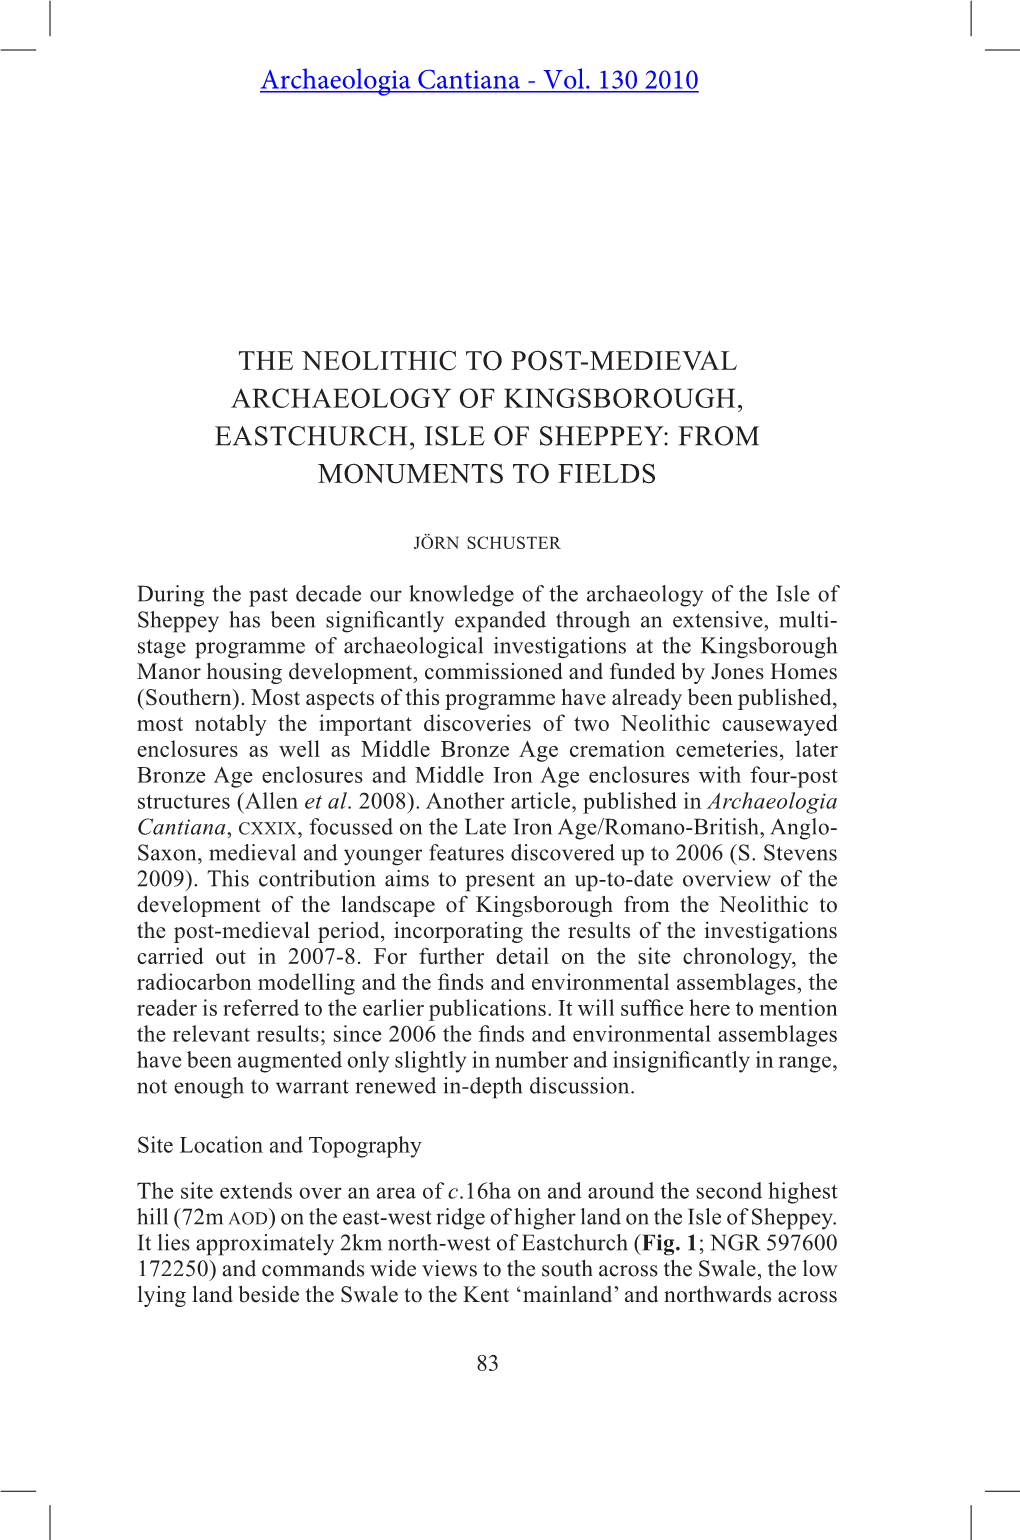 The Neolithic to Post-Medieval Archaeology of Kingsborough, Eastchurch, Isle of Sheppey: from Monuments to Fields